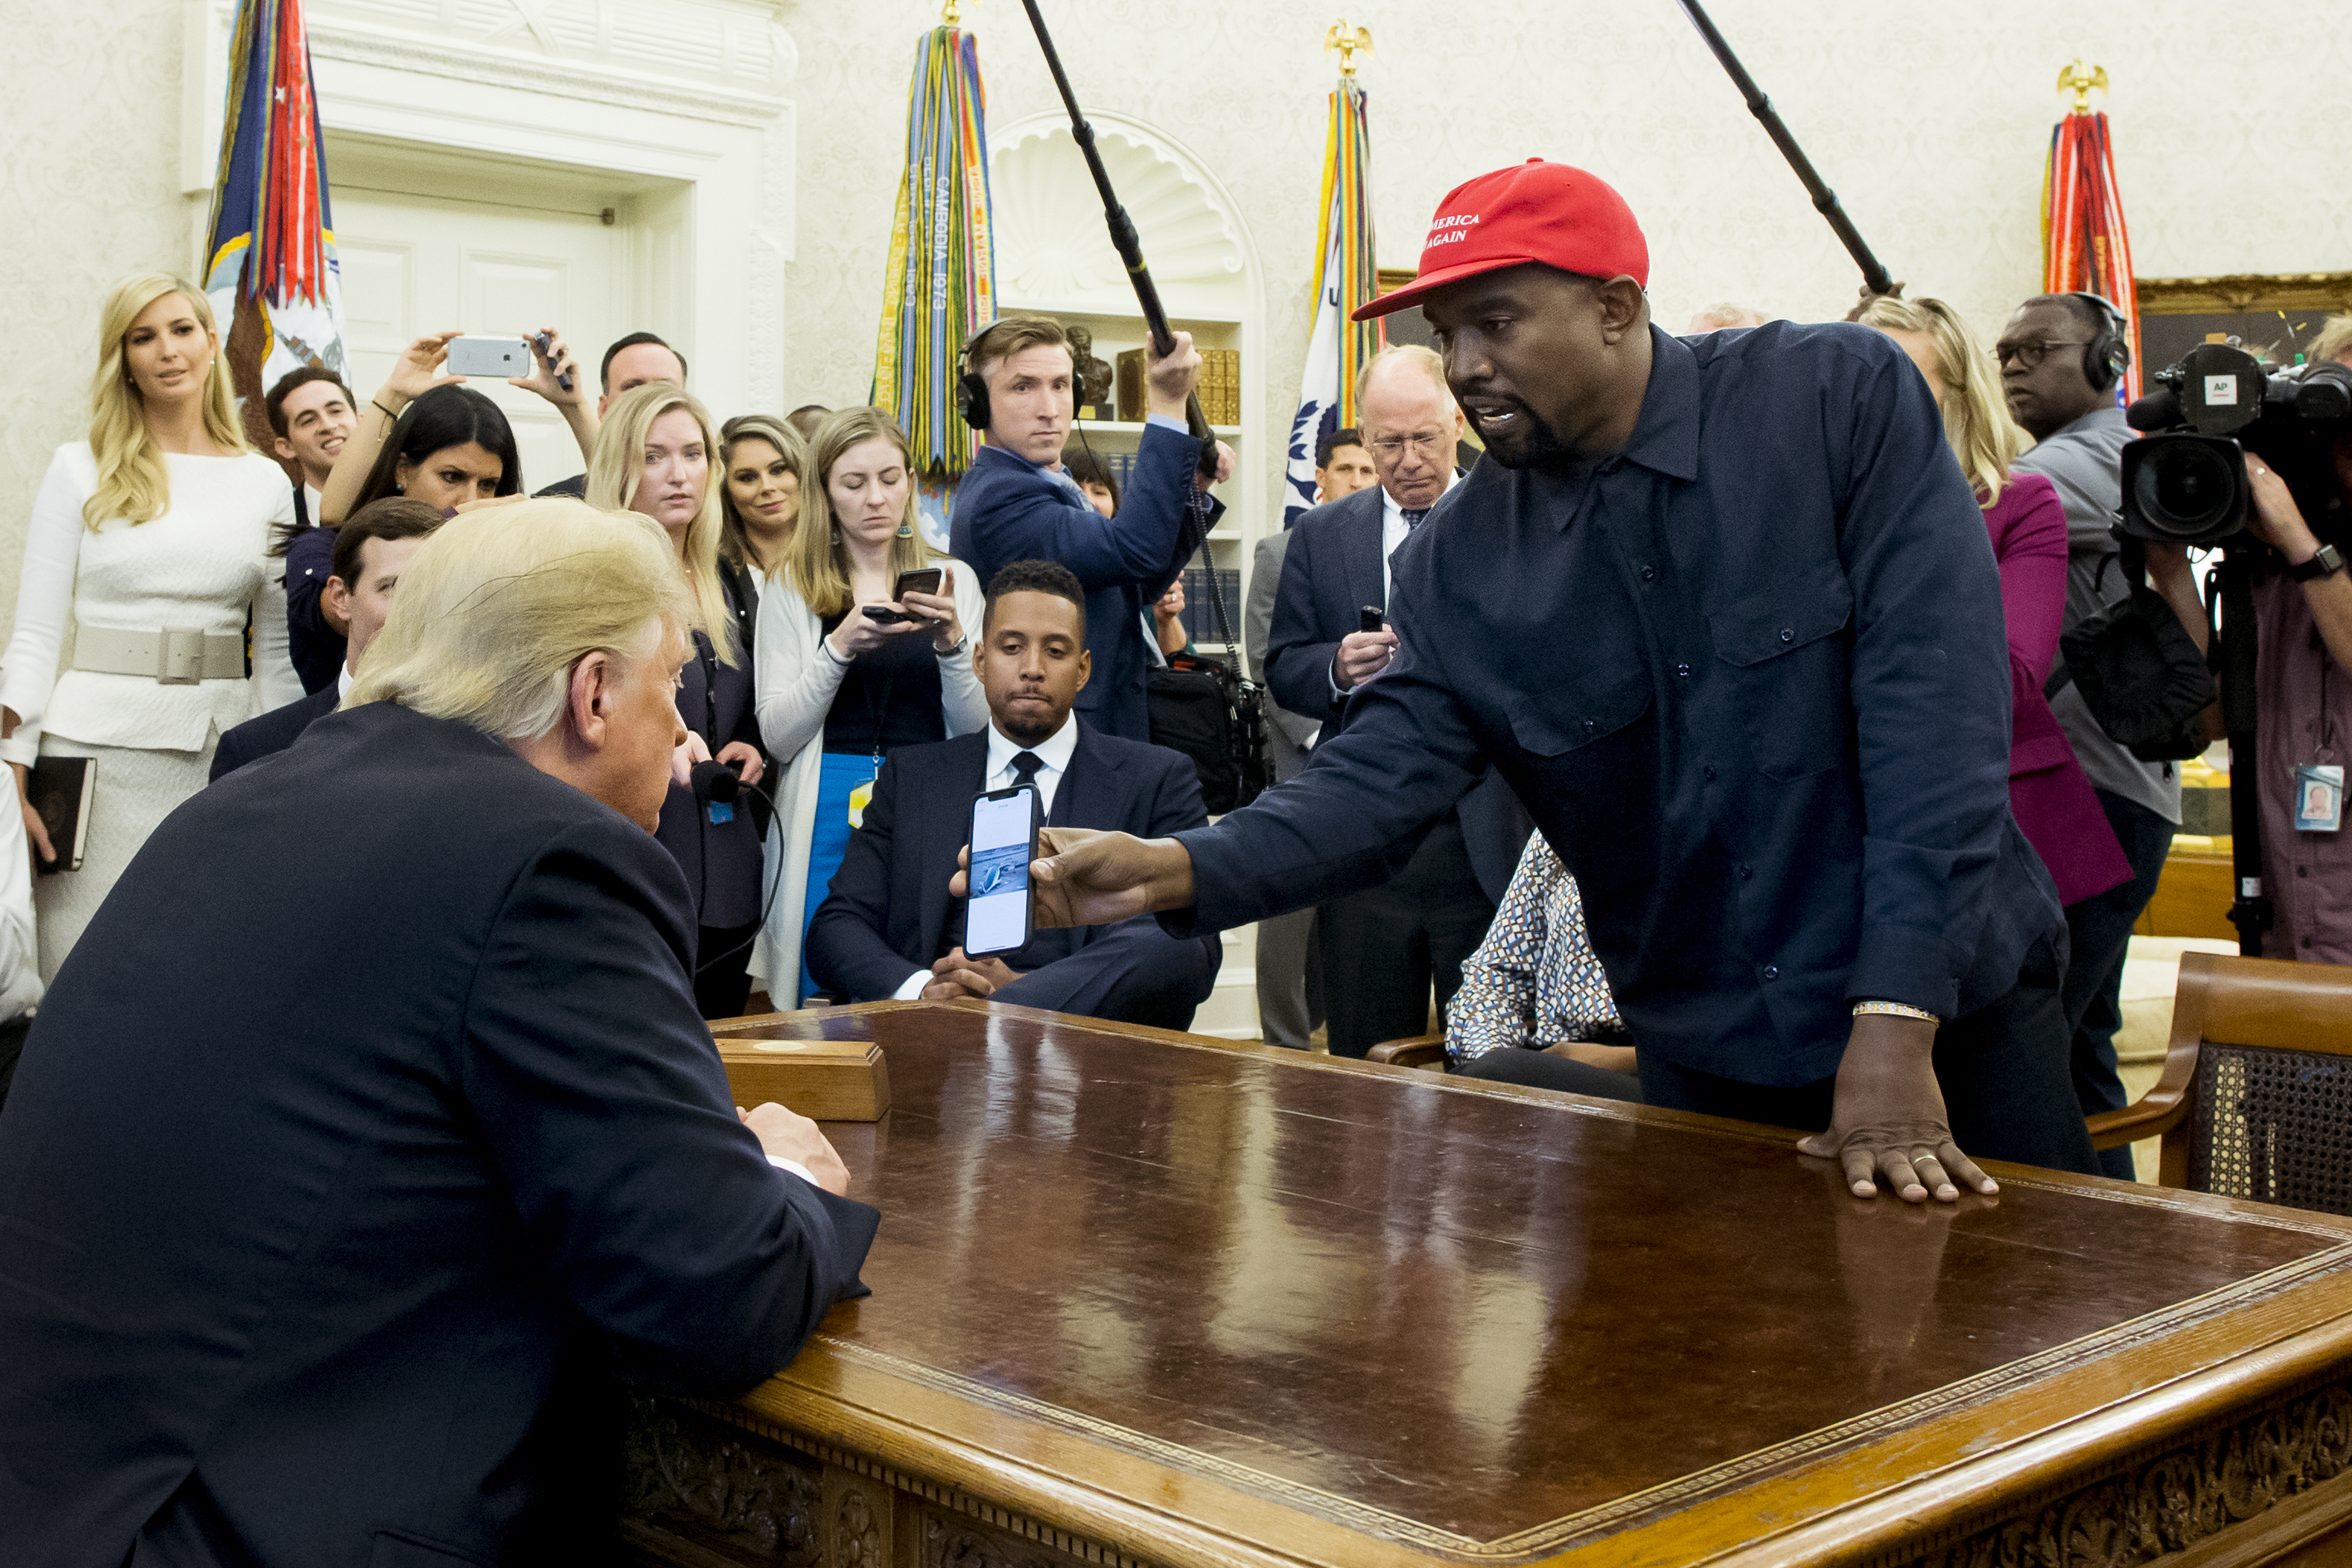 FILE - US entertainer Kanye West (R) shows a cell phone depicting the image of an aircraft to US President Donald J. Trump (L) during their meeting in the Oval Office of the White House in Washington, DC, USA, 11 October 2018. EPA